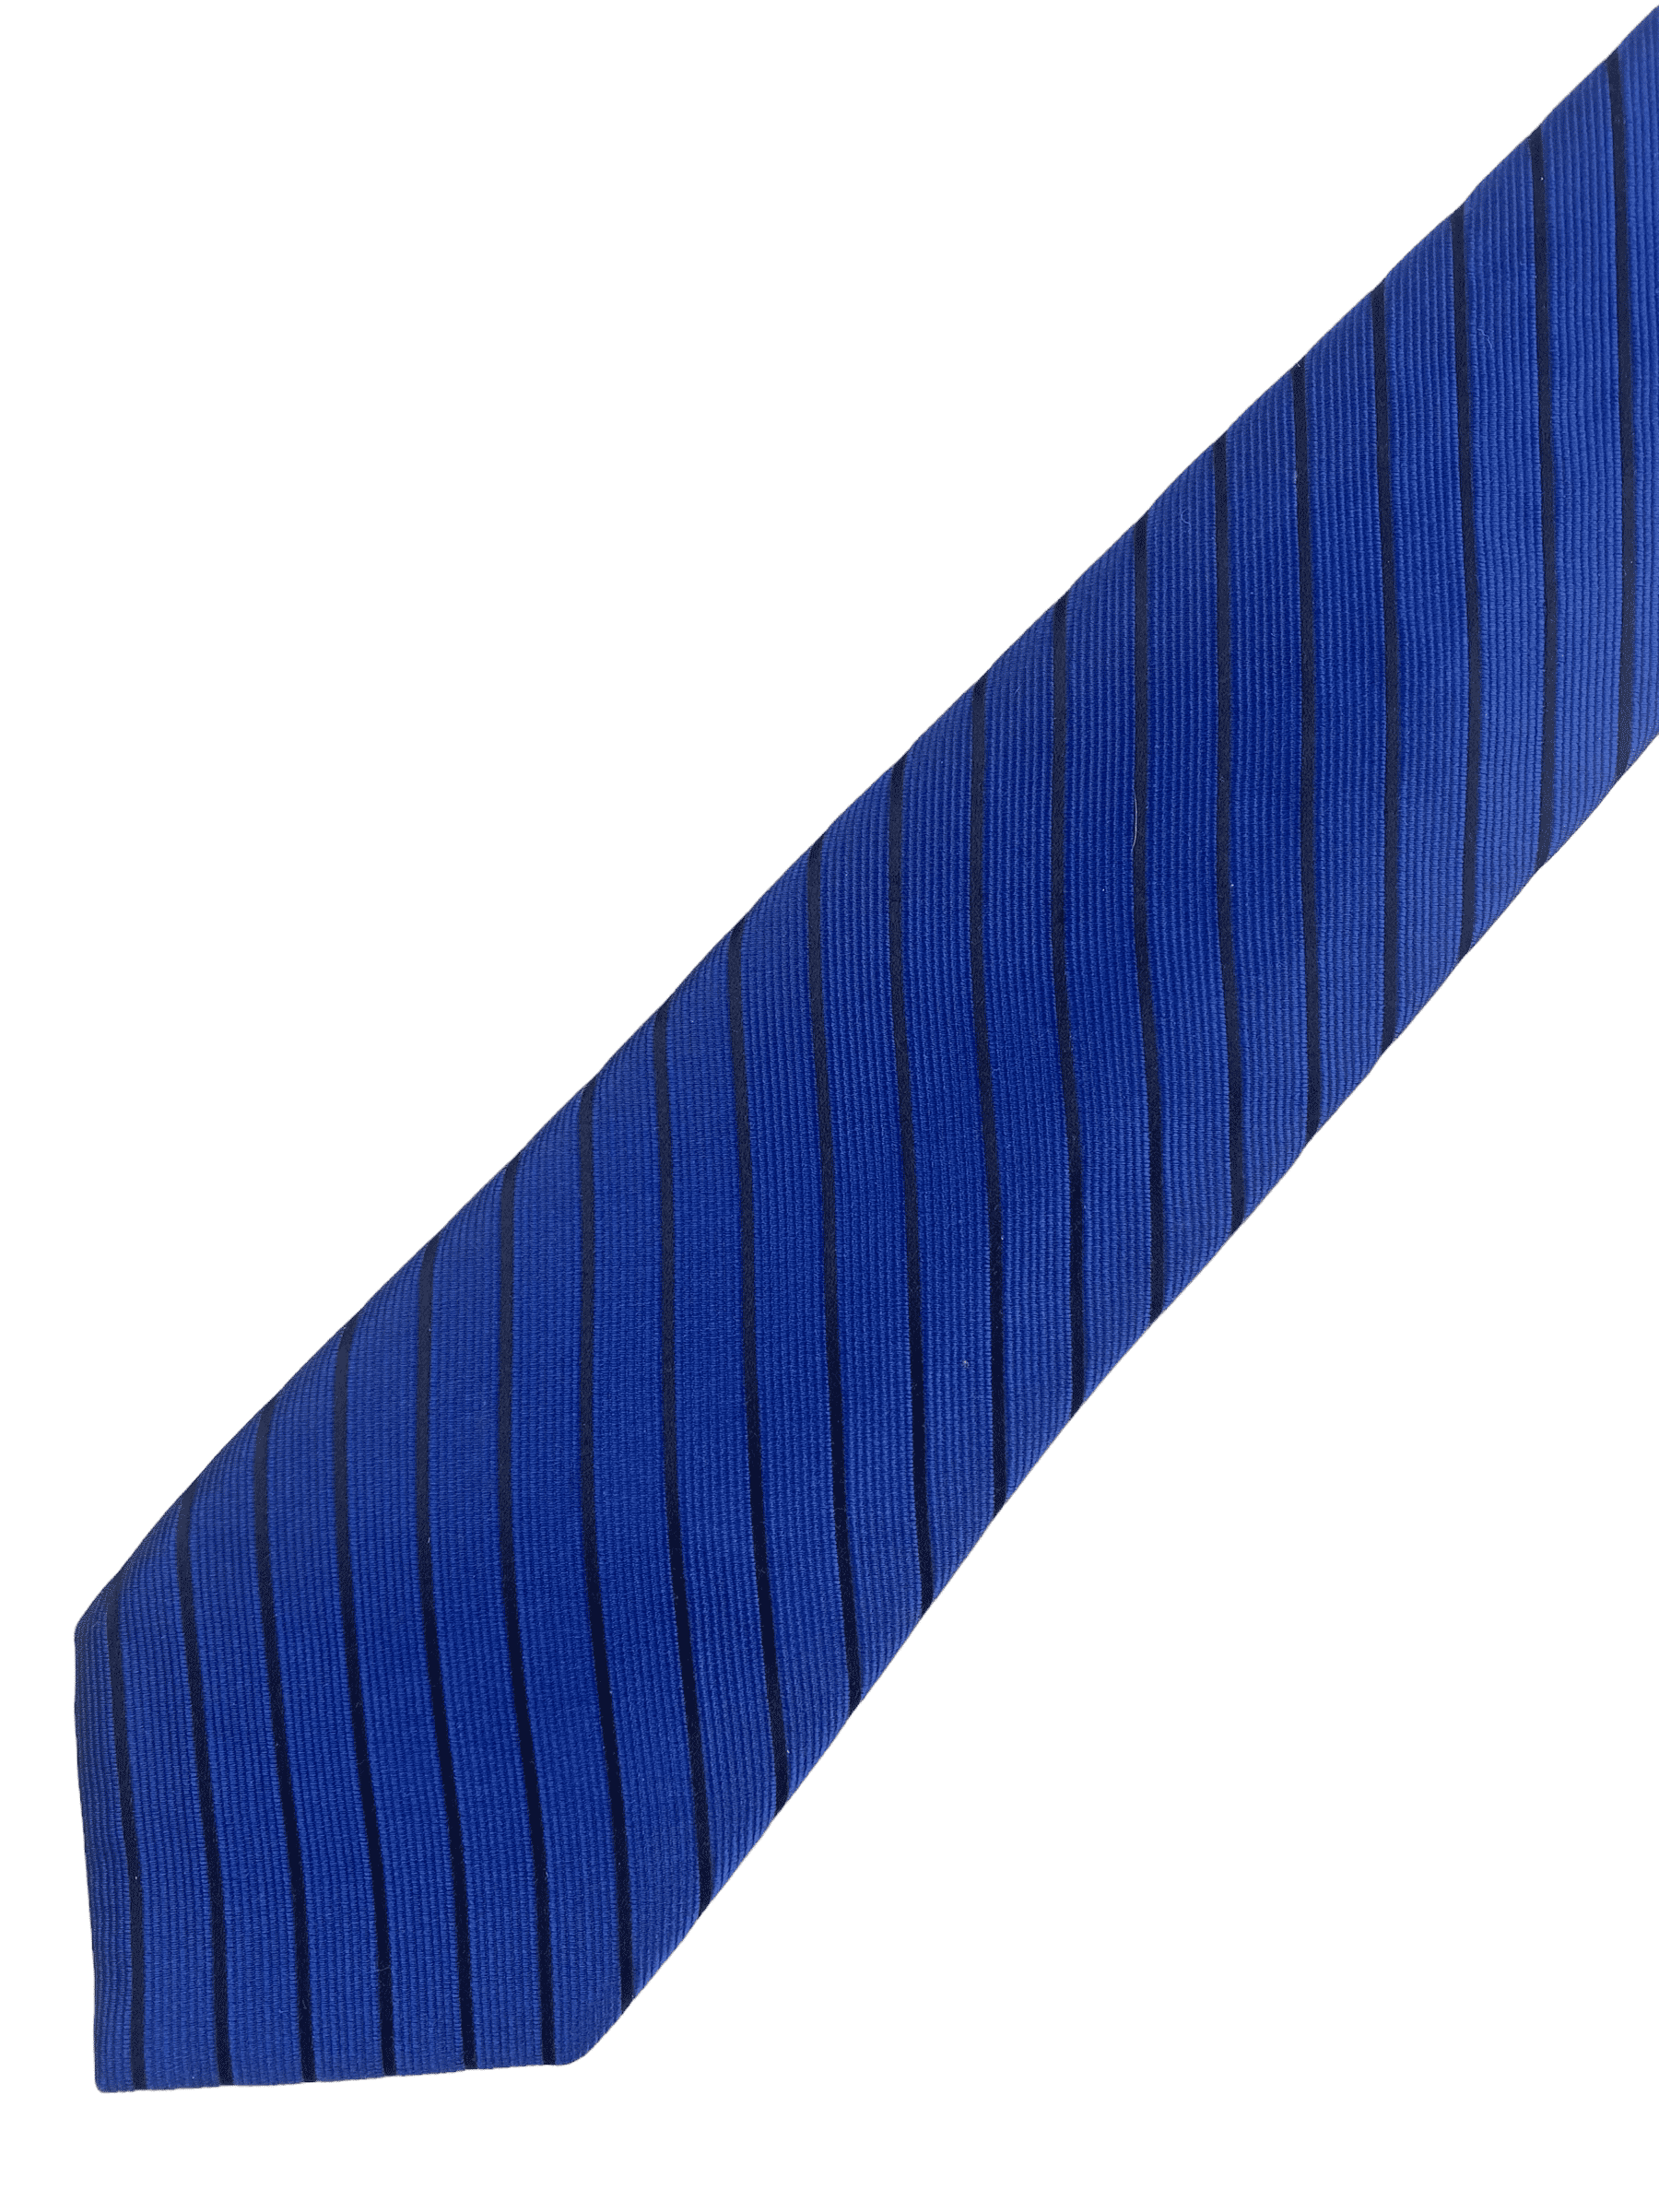 "B" Blue Striped Silk Tie - Genuine Design luxury consignment Calgary, Alberta, Canada New & pre-owned clothing, shoes, accessories.